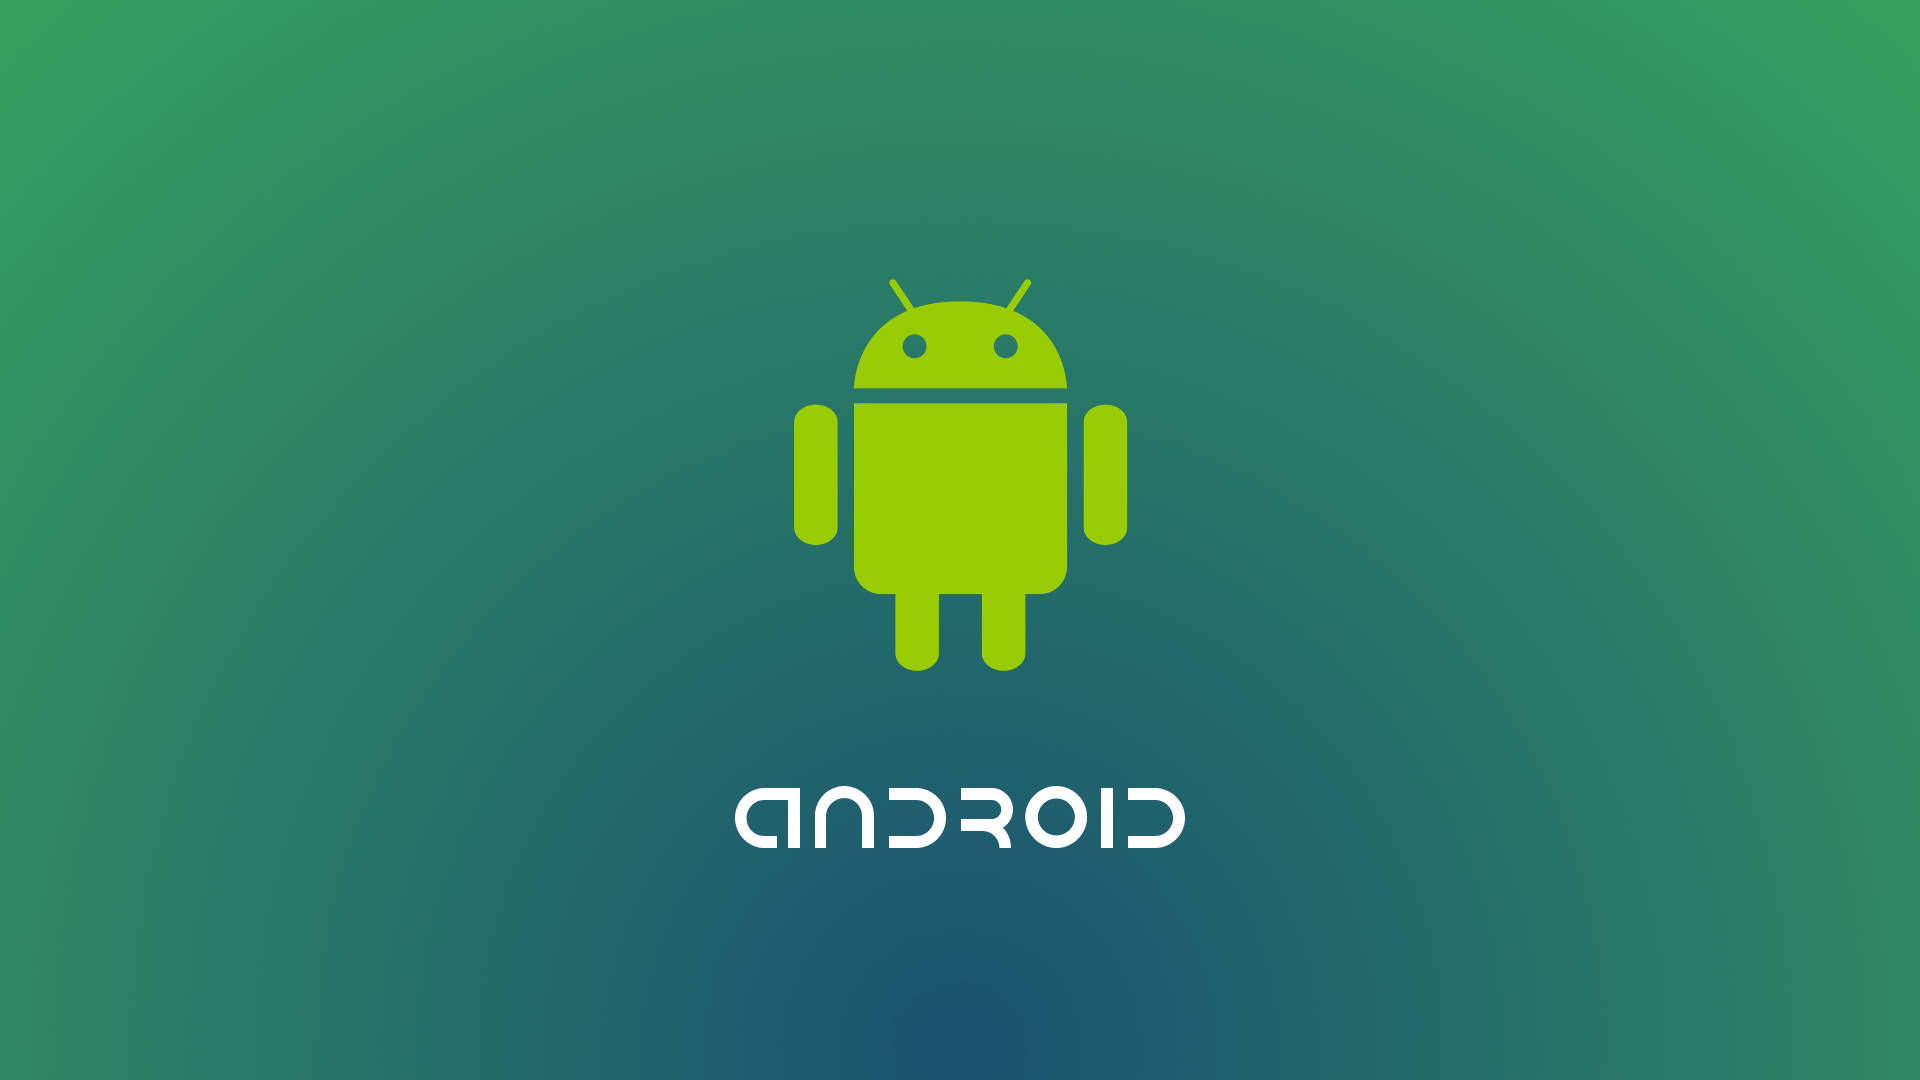 The Iconic Green Android Logo Background